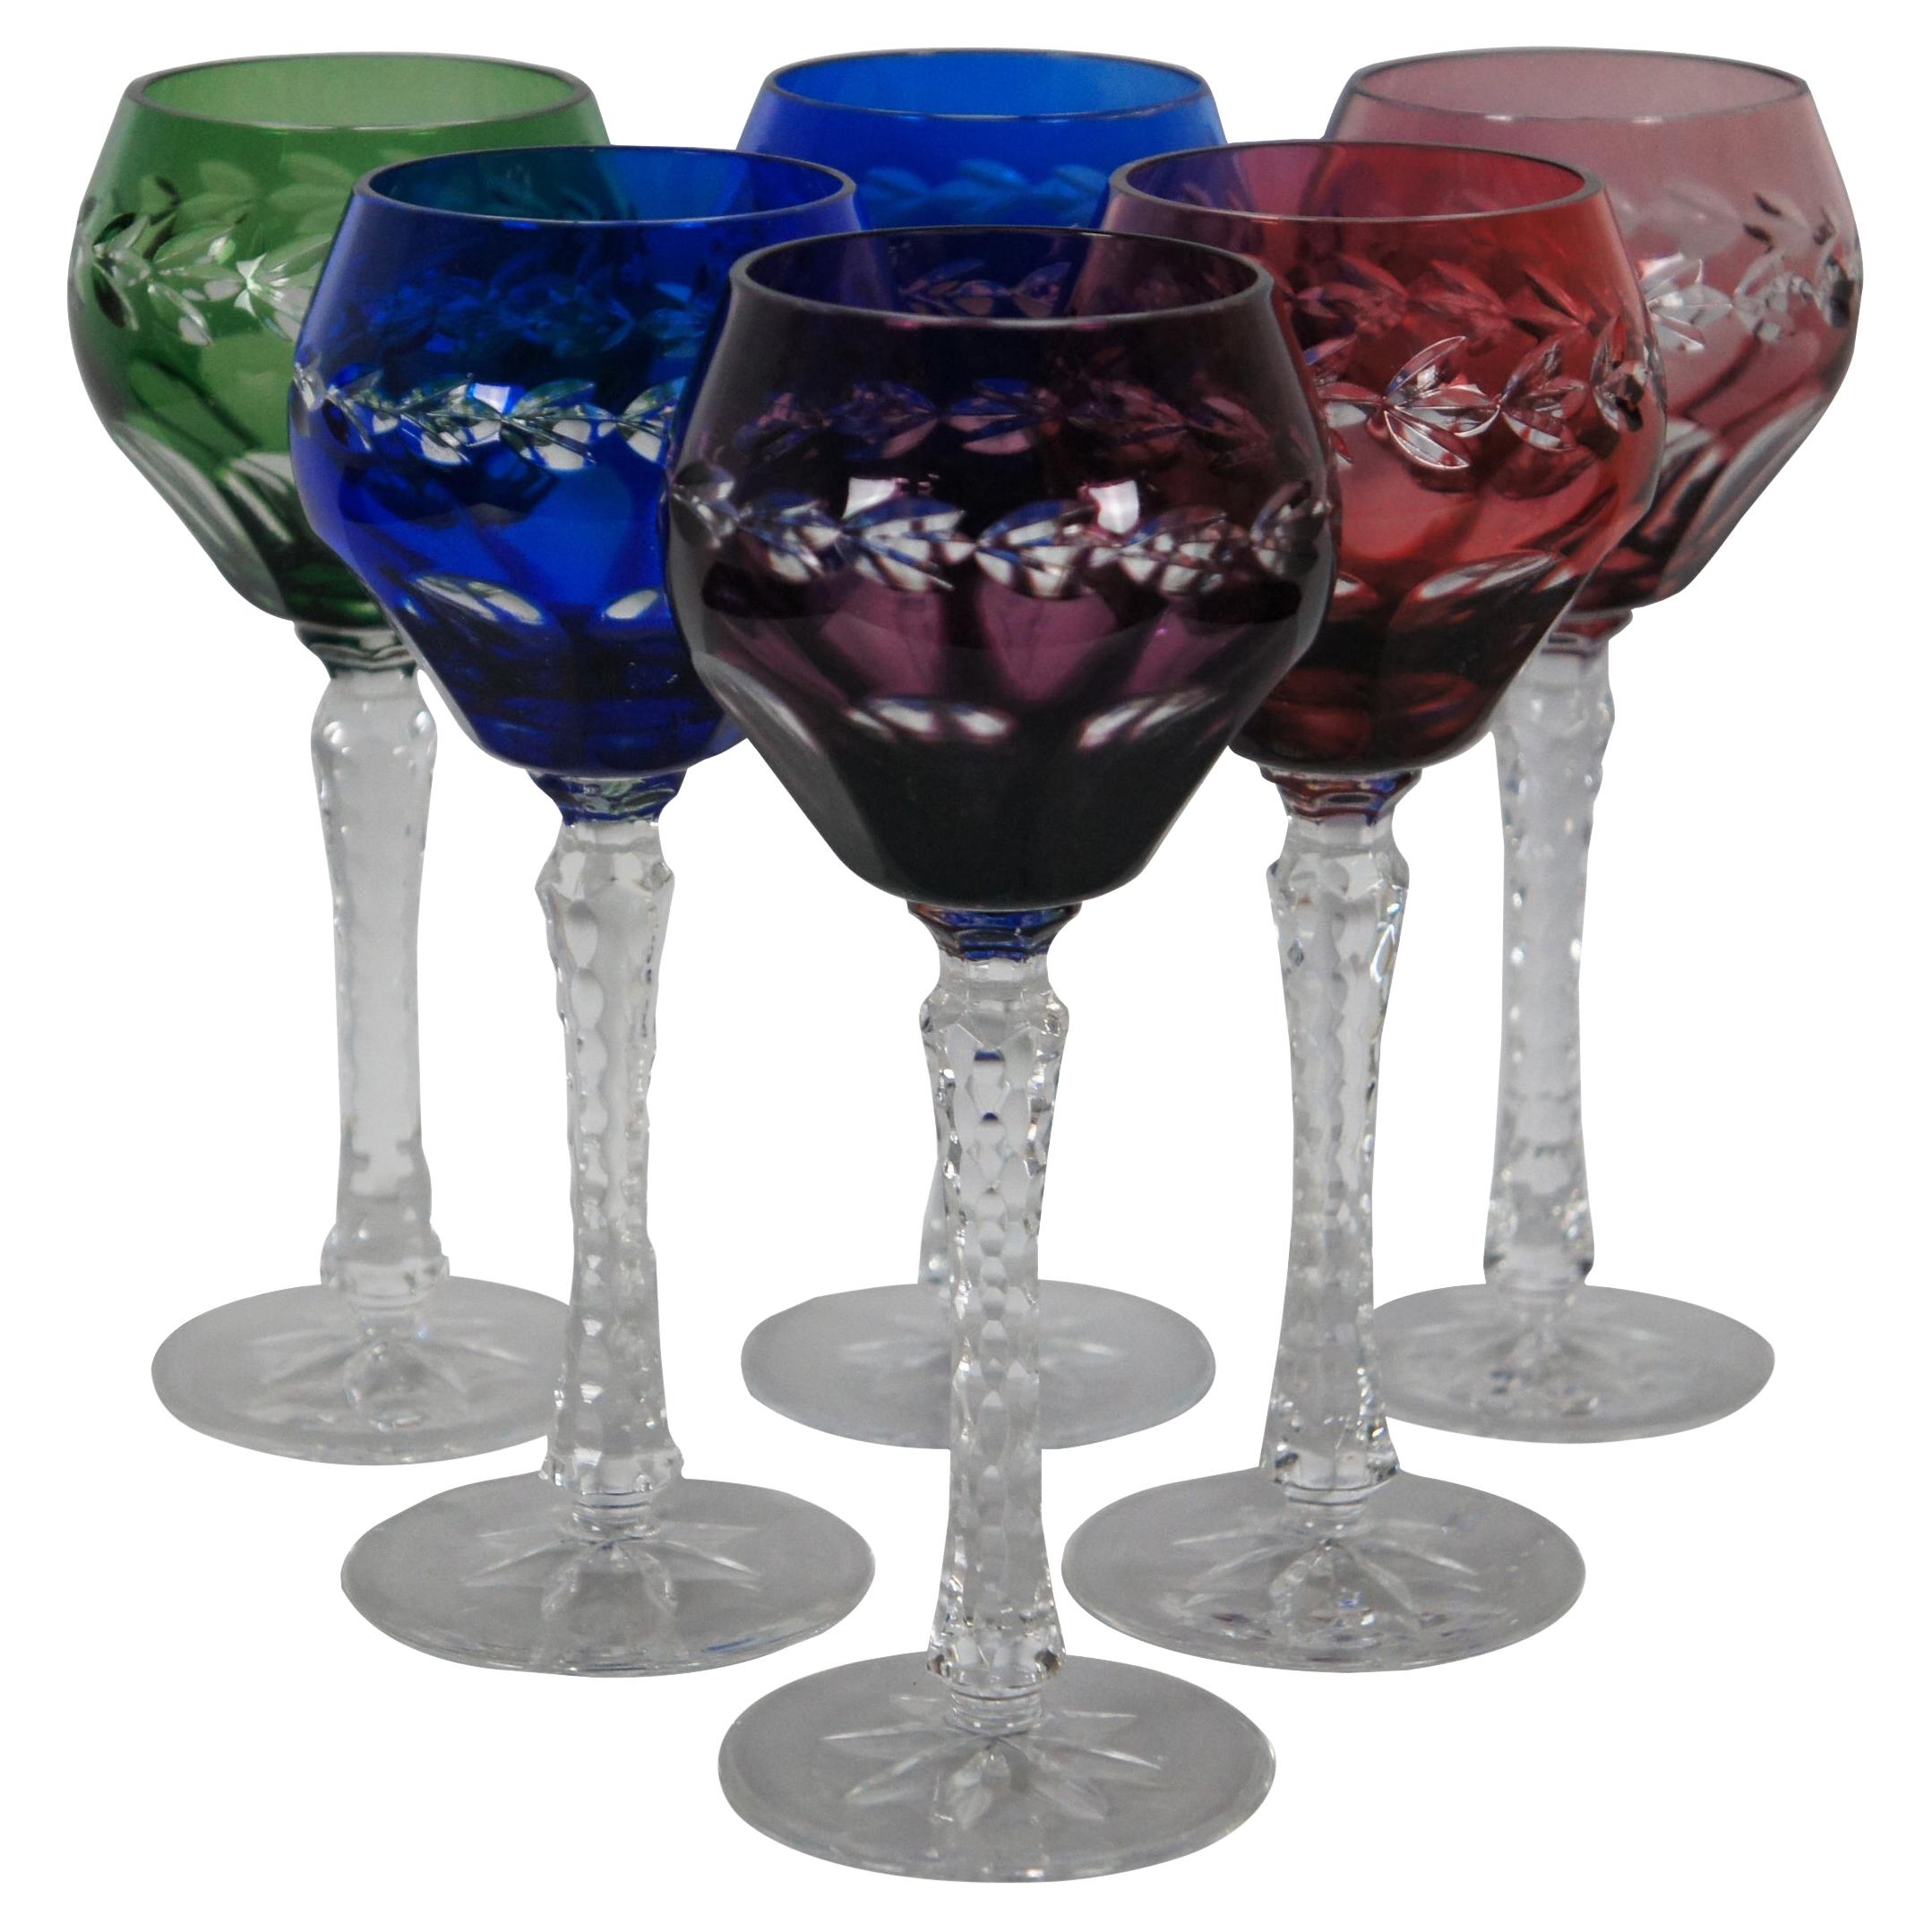 https://a.1stdibscdn.com/6-multicolor-bohemian-crystal-ajka-cut-to-clear-wine-glass-goblets-hungary-for-sale/1121189/f_246859421627666375199/24685942_master.jpg